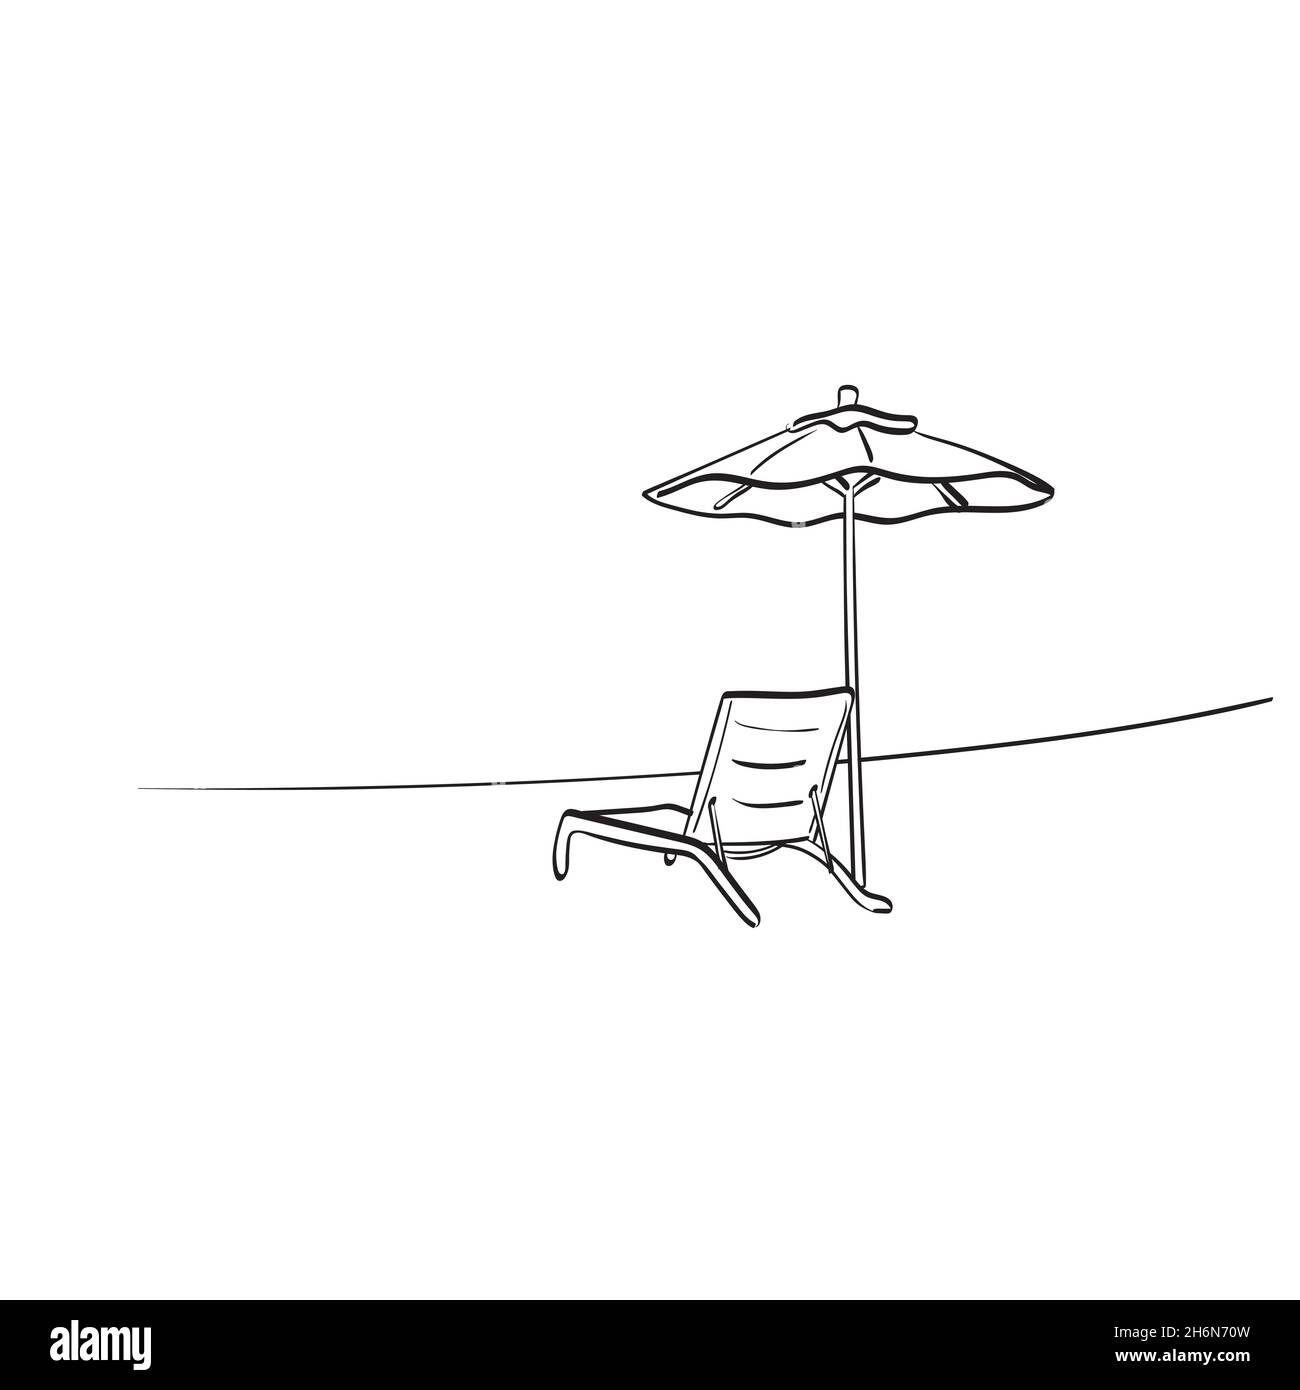 3,446 Beach Umbrella Line Drawing Royalty-Free Images, Stock Photos &  Pictures | Shutterstock